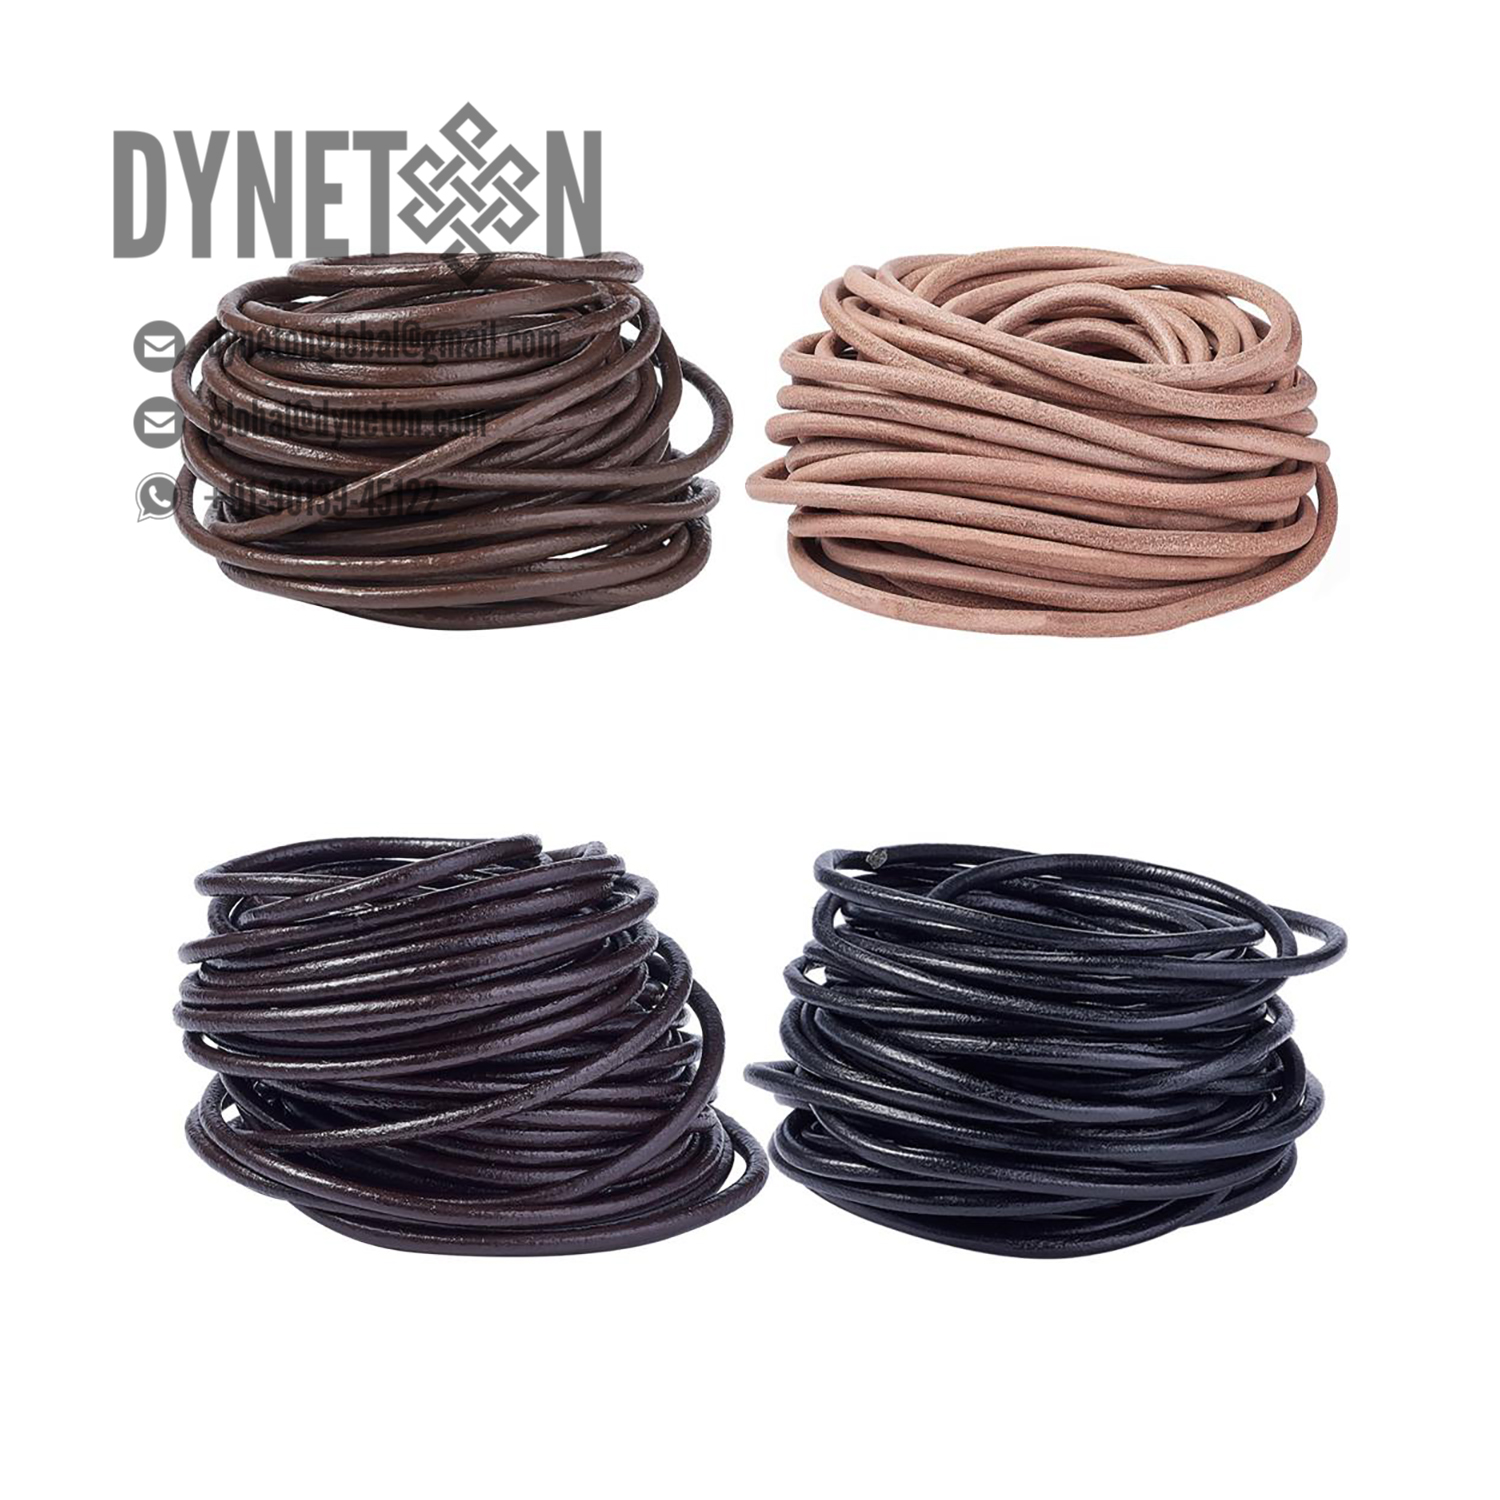 4mm Round Leather Cord - DYNETON / Round Leather Cords 4 mm